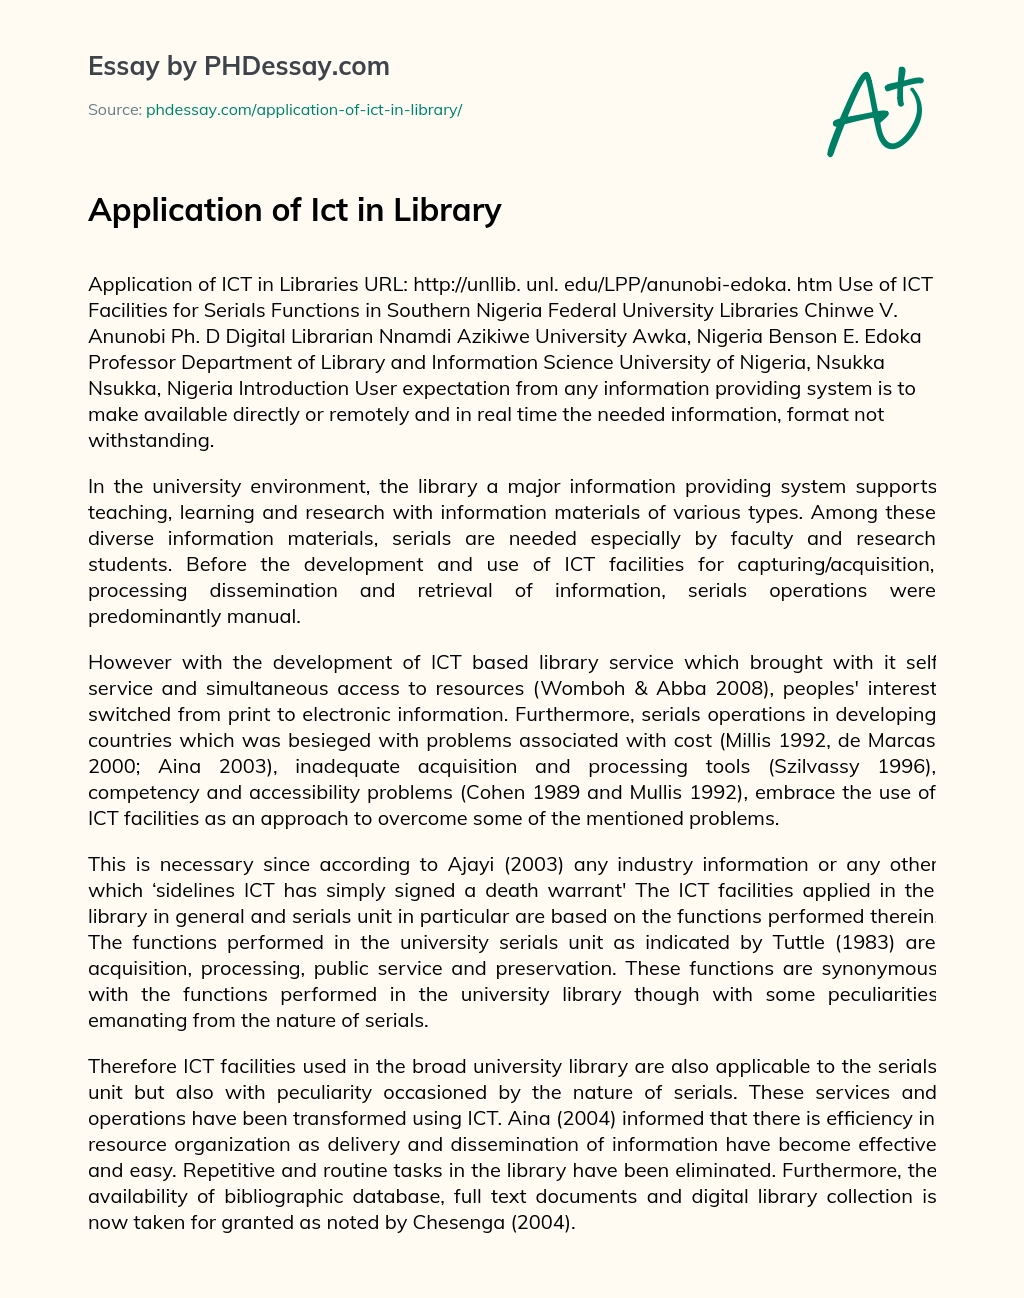 Application of Ict in Library essay